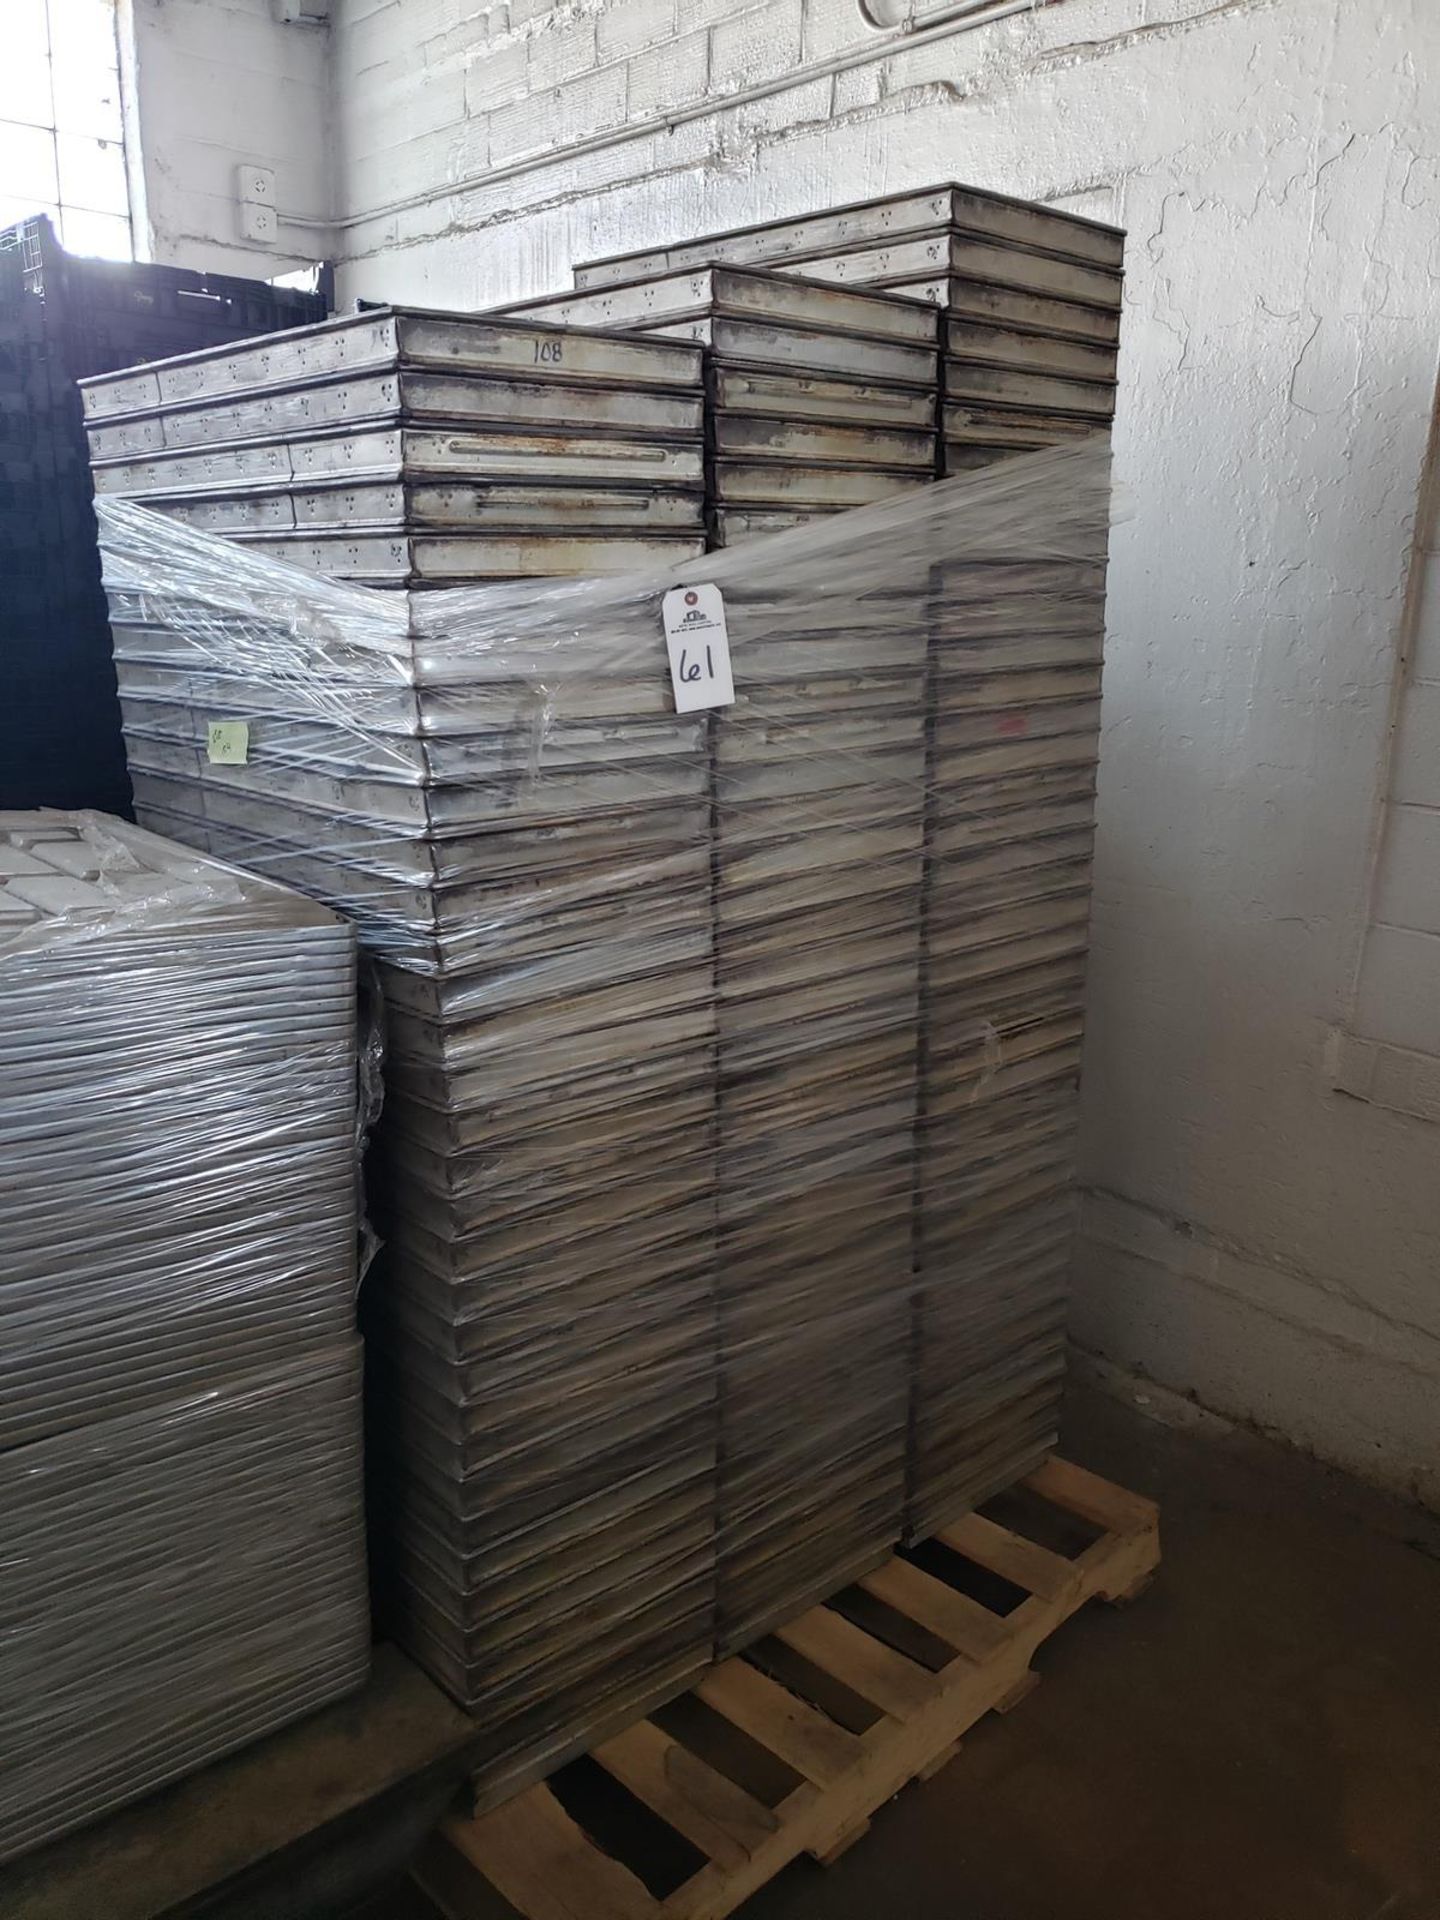 Lot of approx. 108 4 1/2" X 12" 5 Strap Bread Baking Pans | Rig Fee: $100